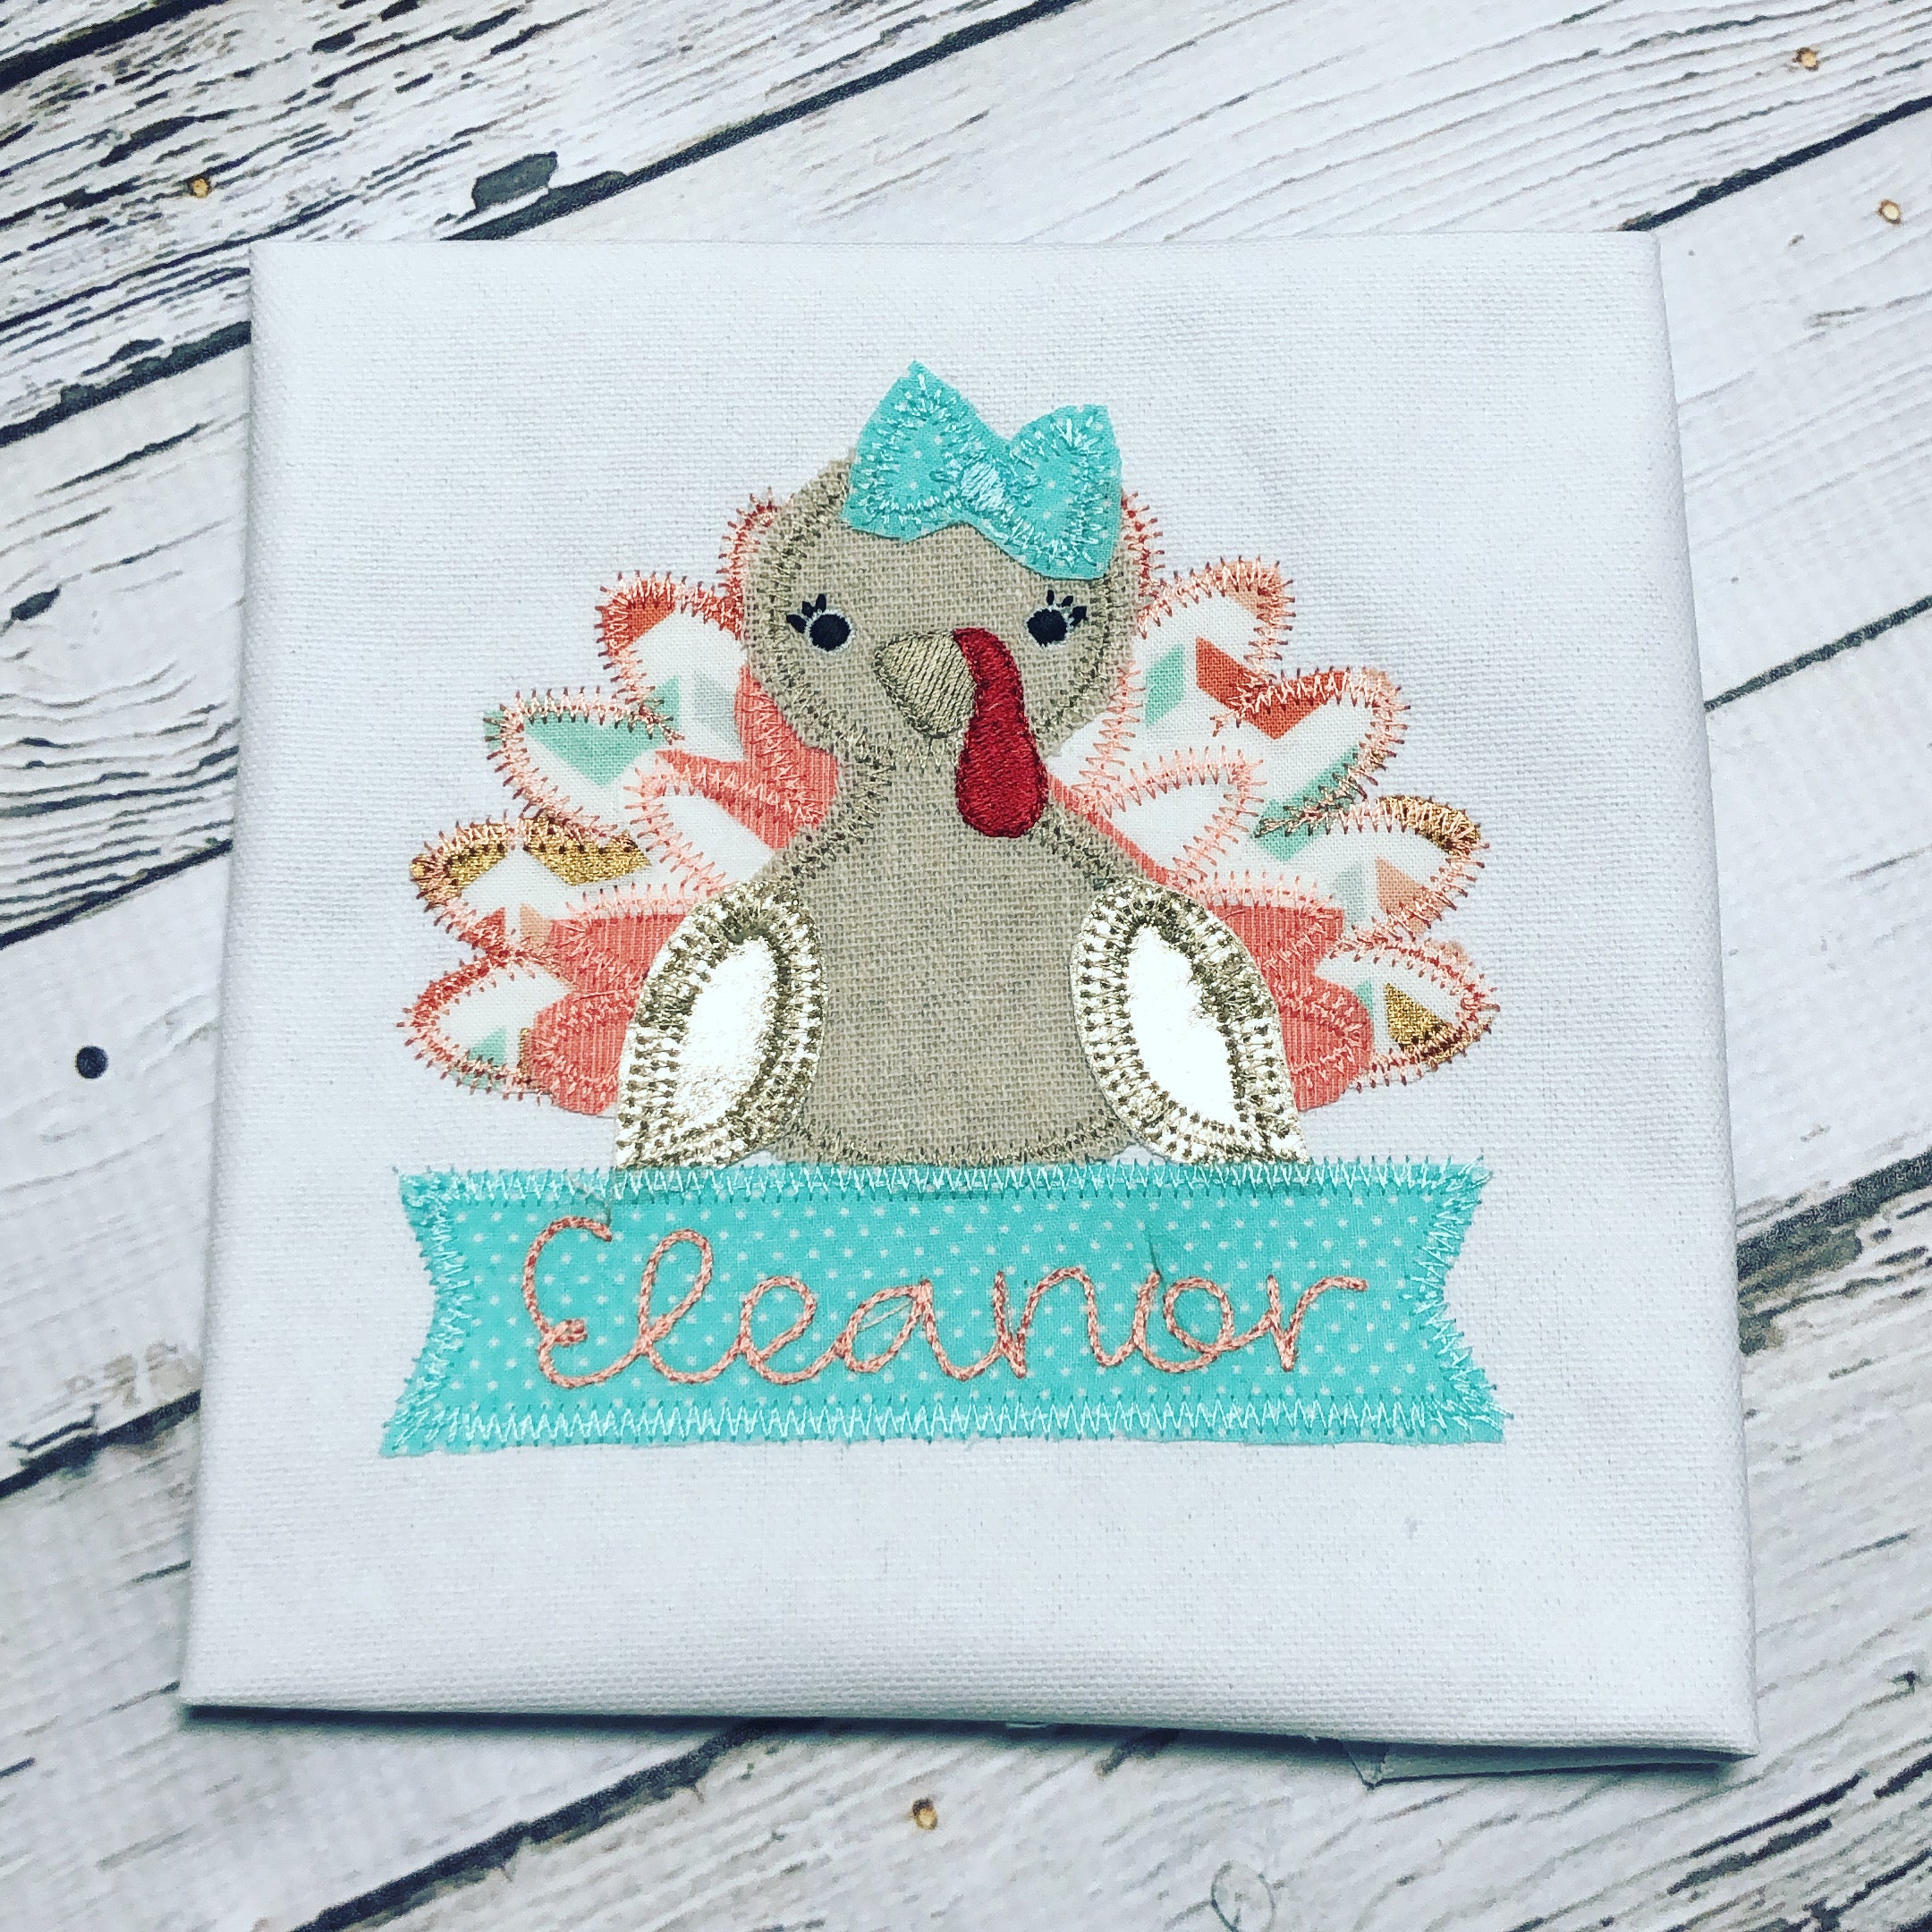 Turkey with bow banner personalized Girl Ruffle Shirt